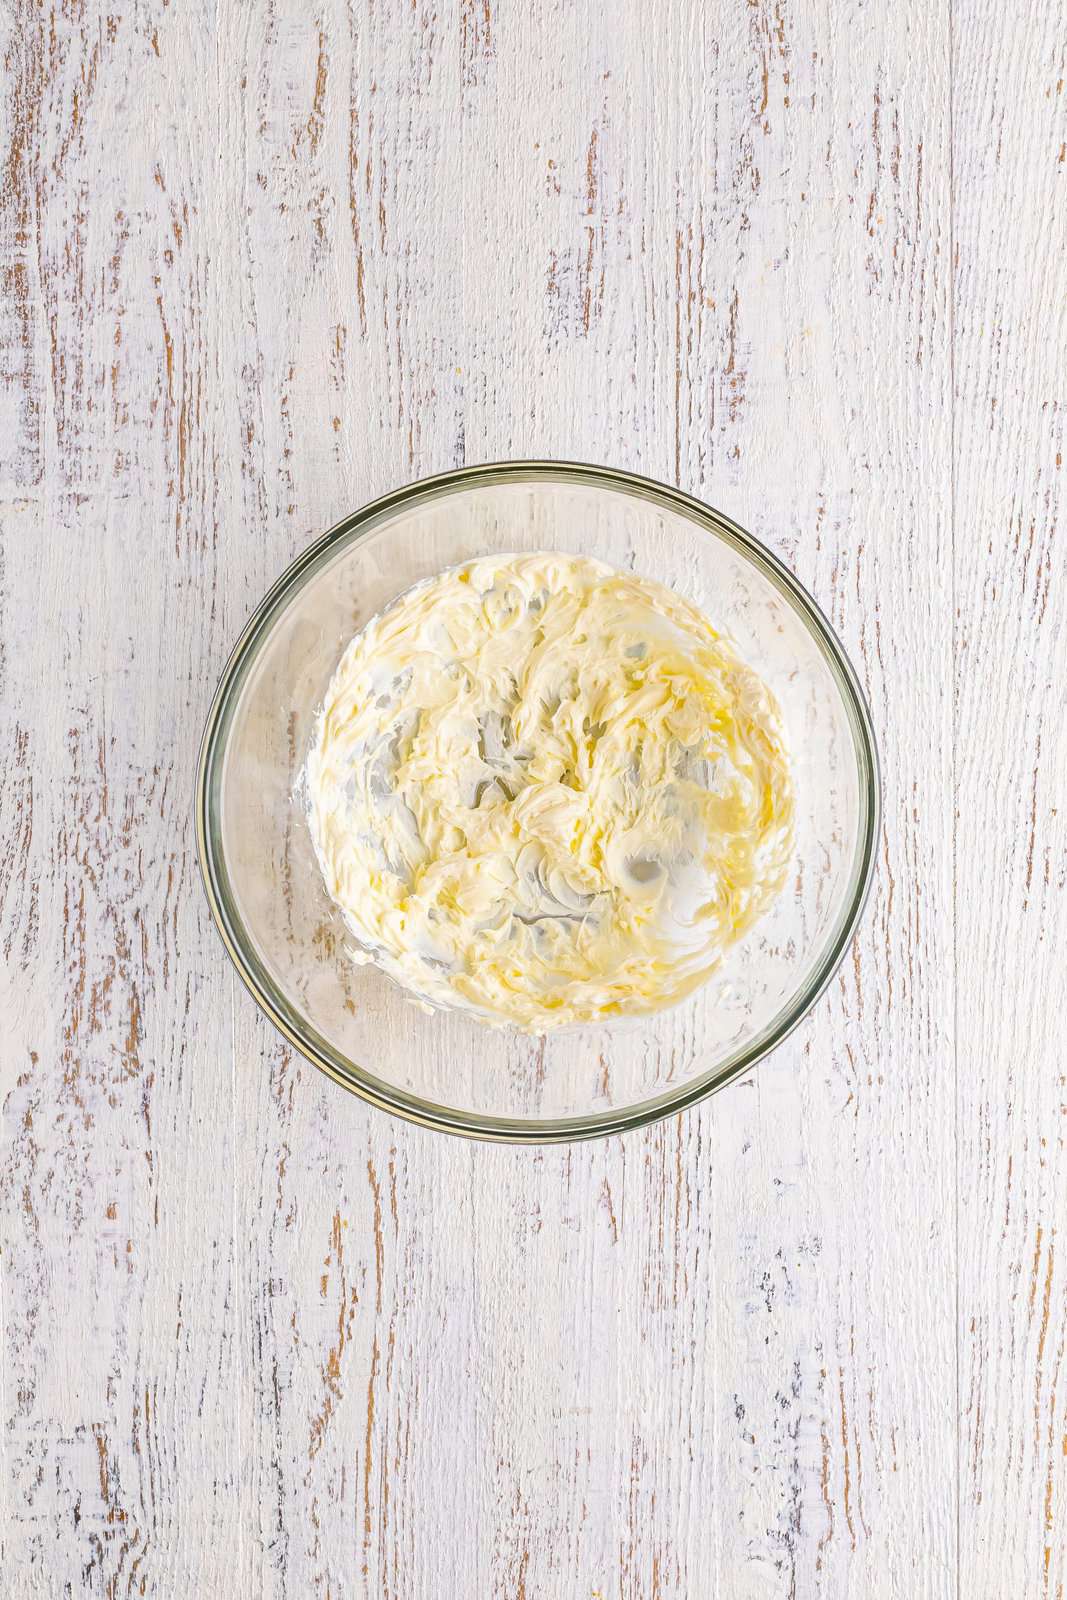 A mixing bowl with cream cheese.